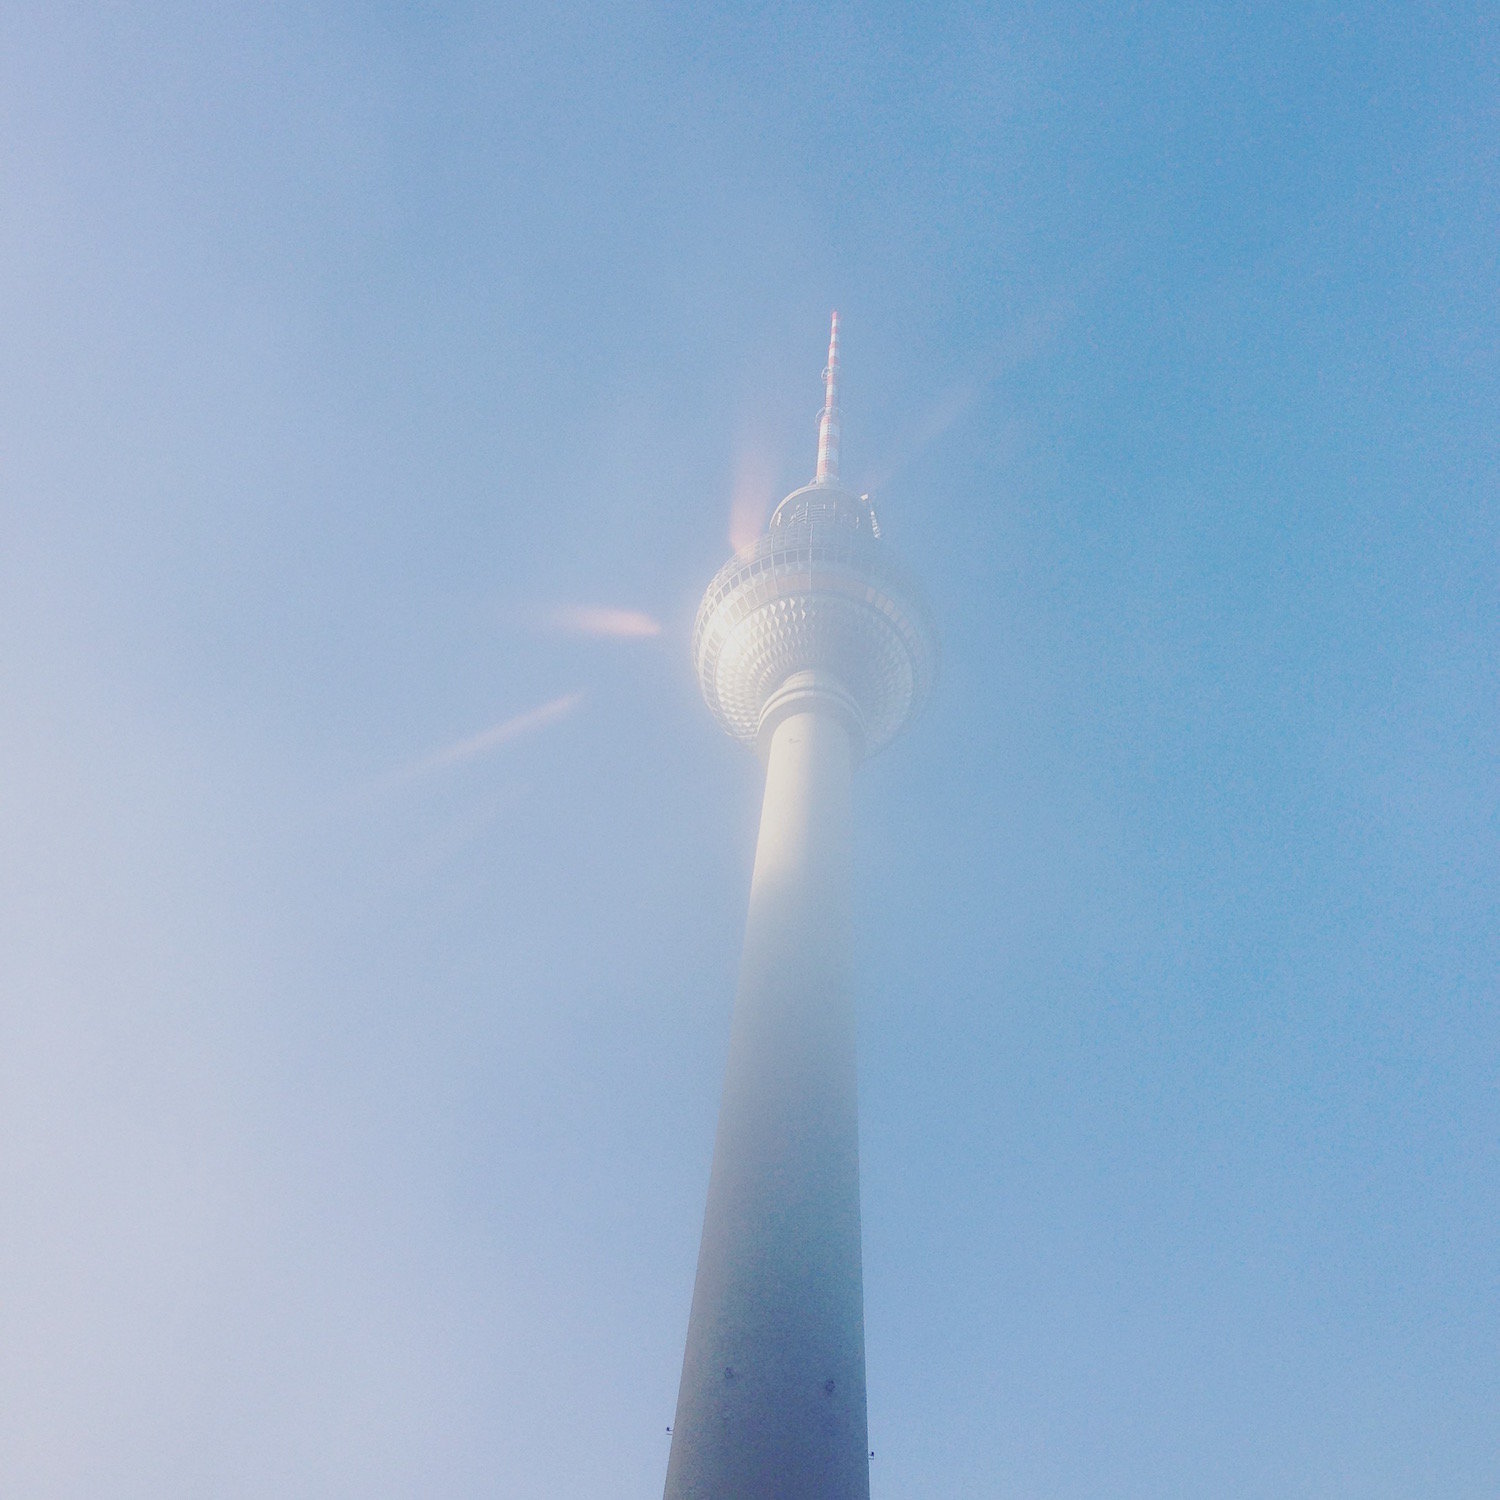 The Berlin TV Tower at dawn (Eat Me. Drink Me.)